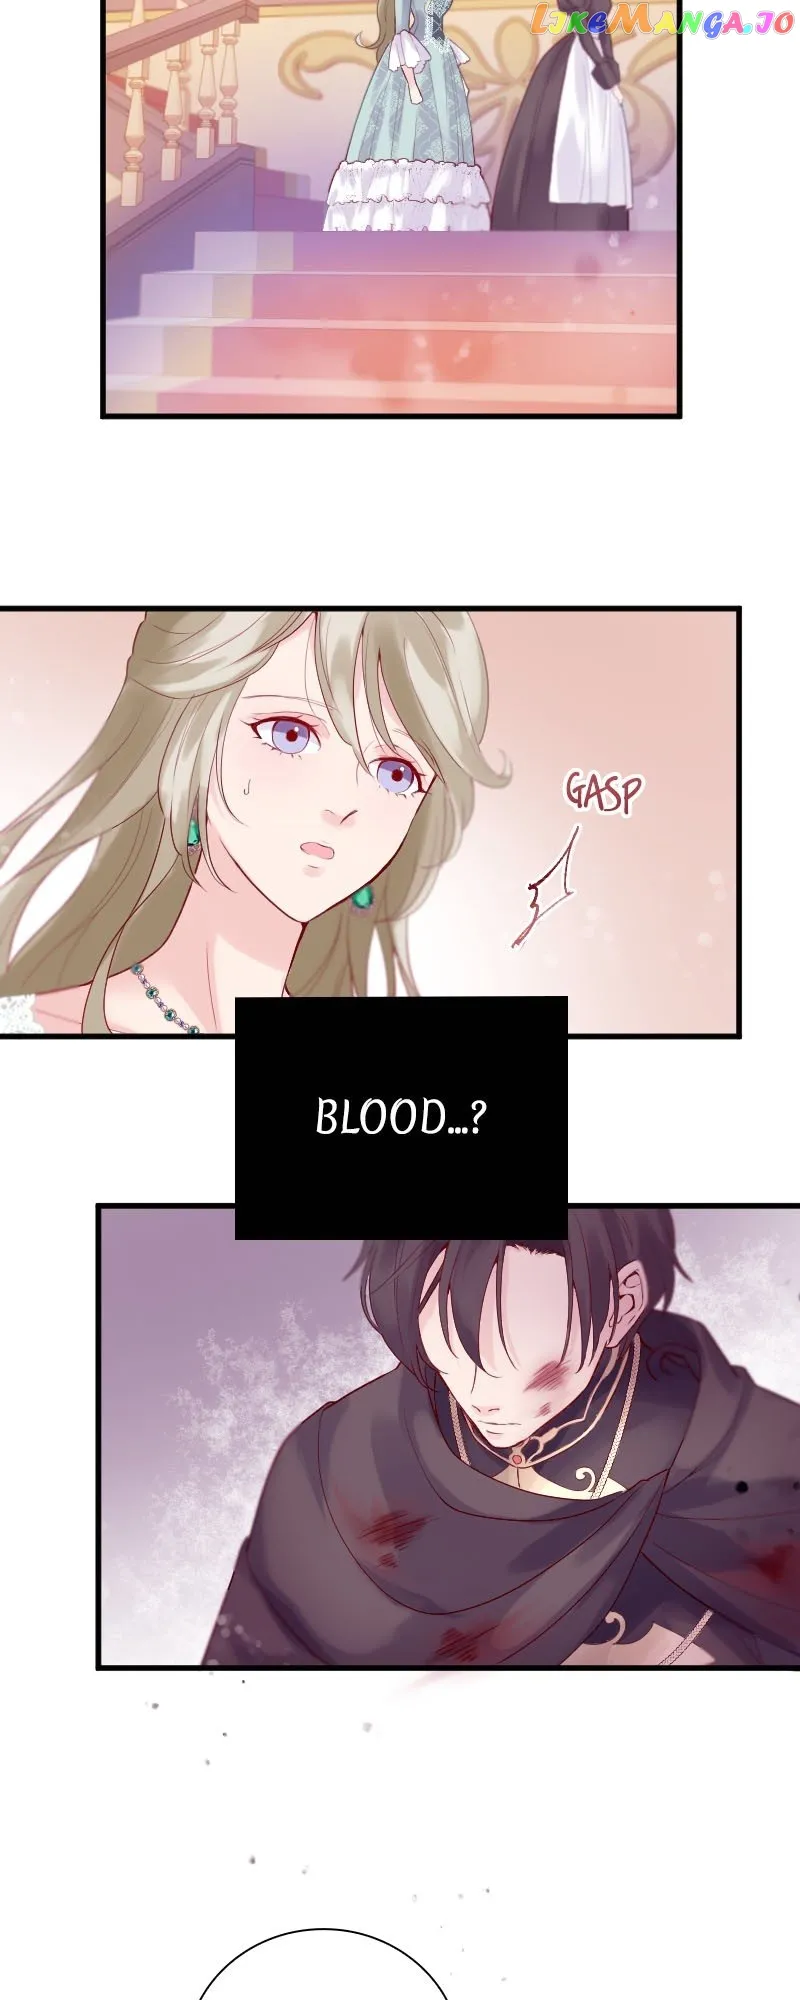 Chords of Affection: The Icy Monarch’s Love chapter 2